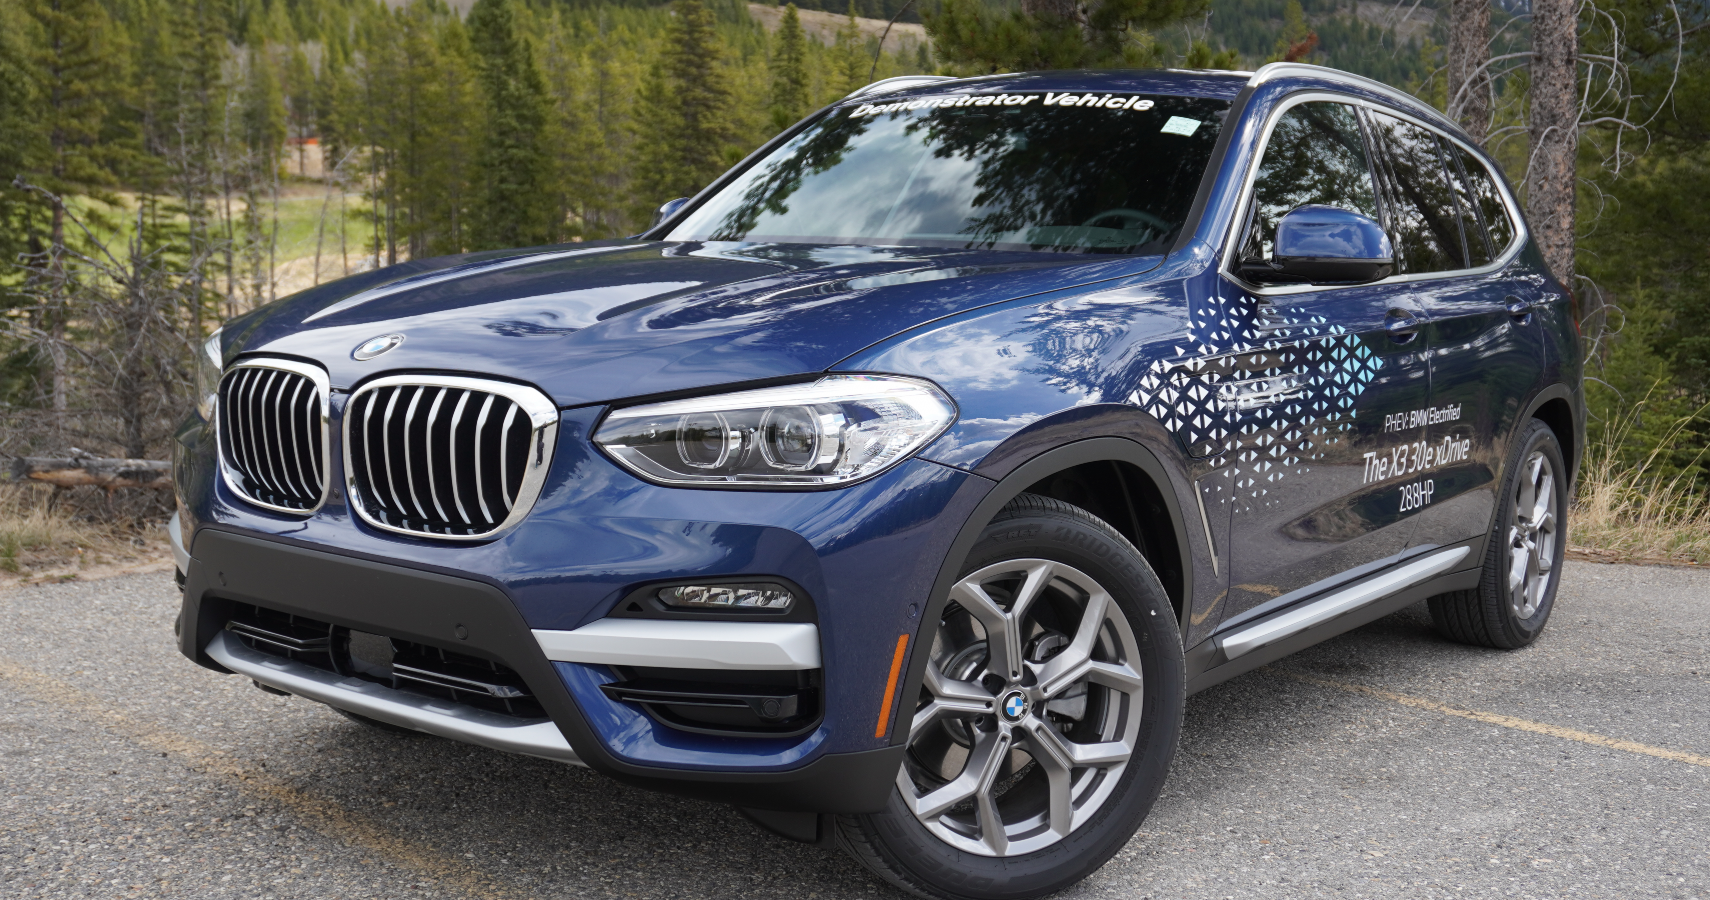 The New 2021 BMW X3 xDrive30e Is A Sophisticated Plug-In Compact Crossover